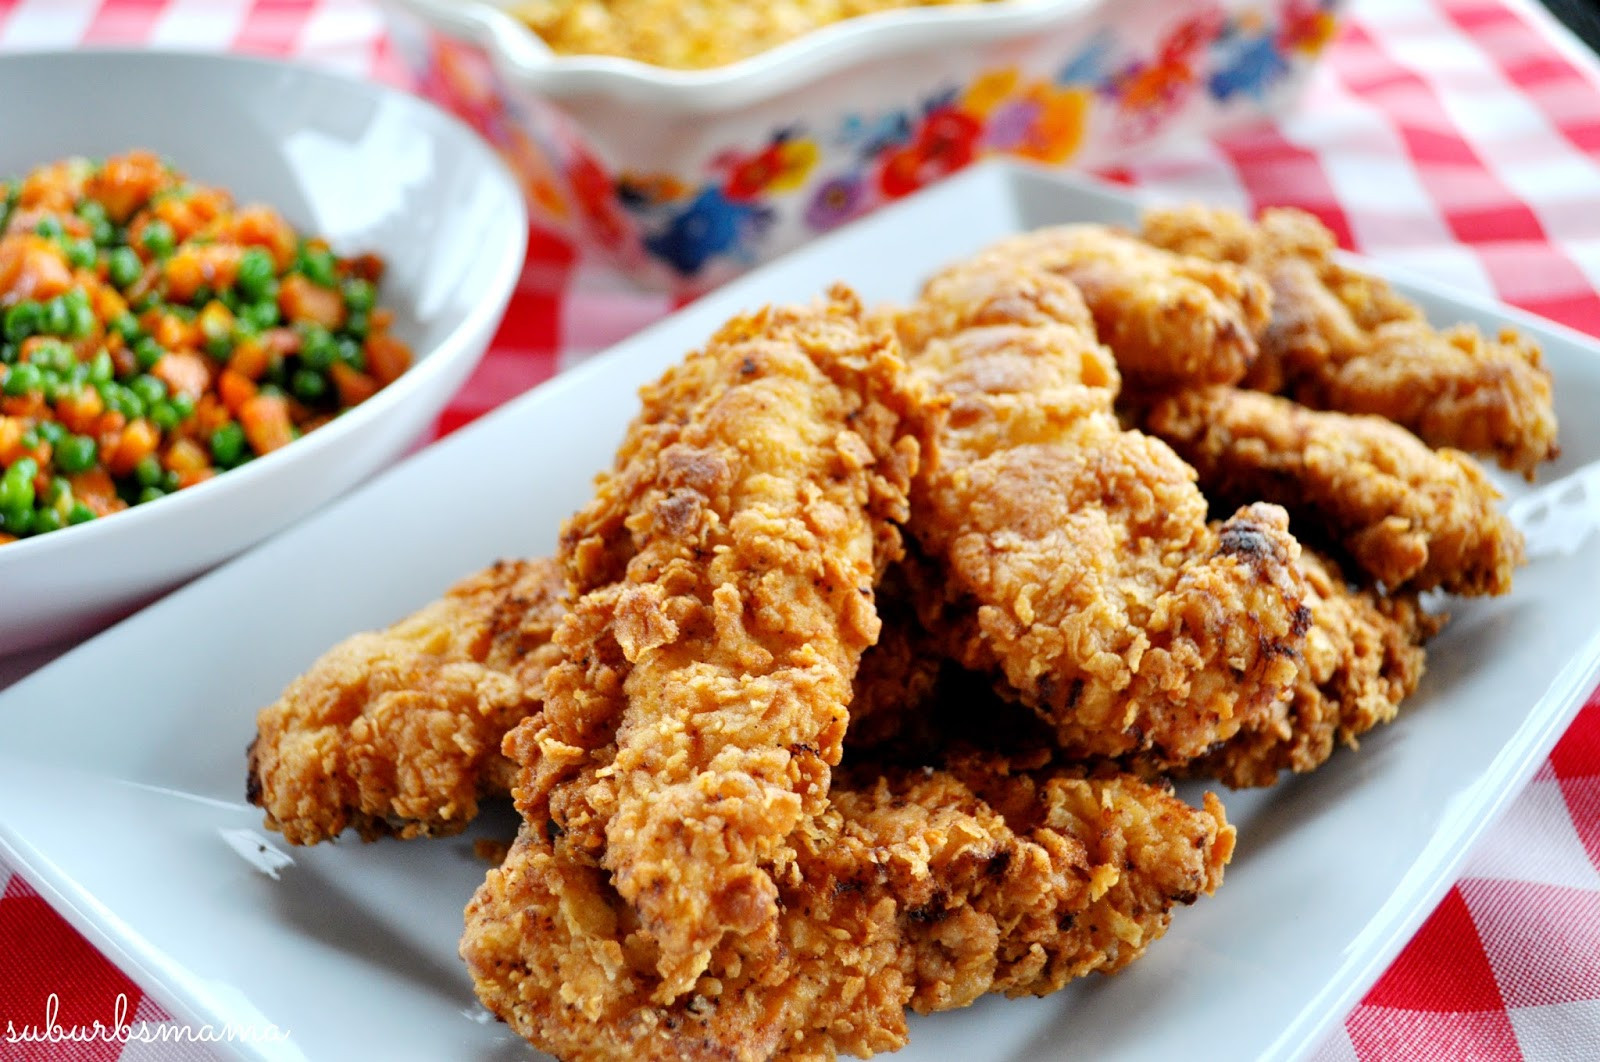 Fried Chicken Strips
 Suburbs Mama Fried Chicken Tenders